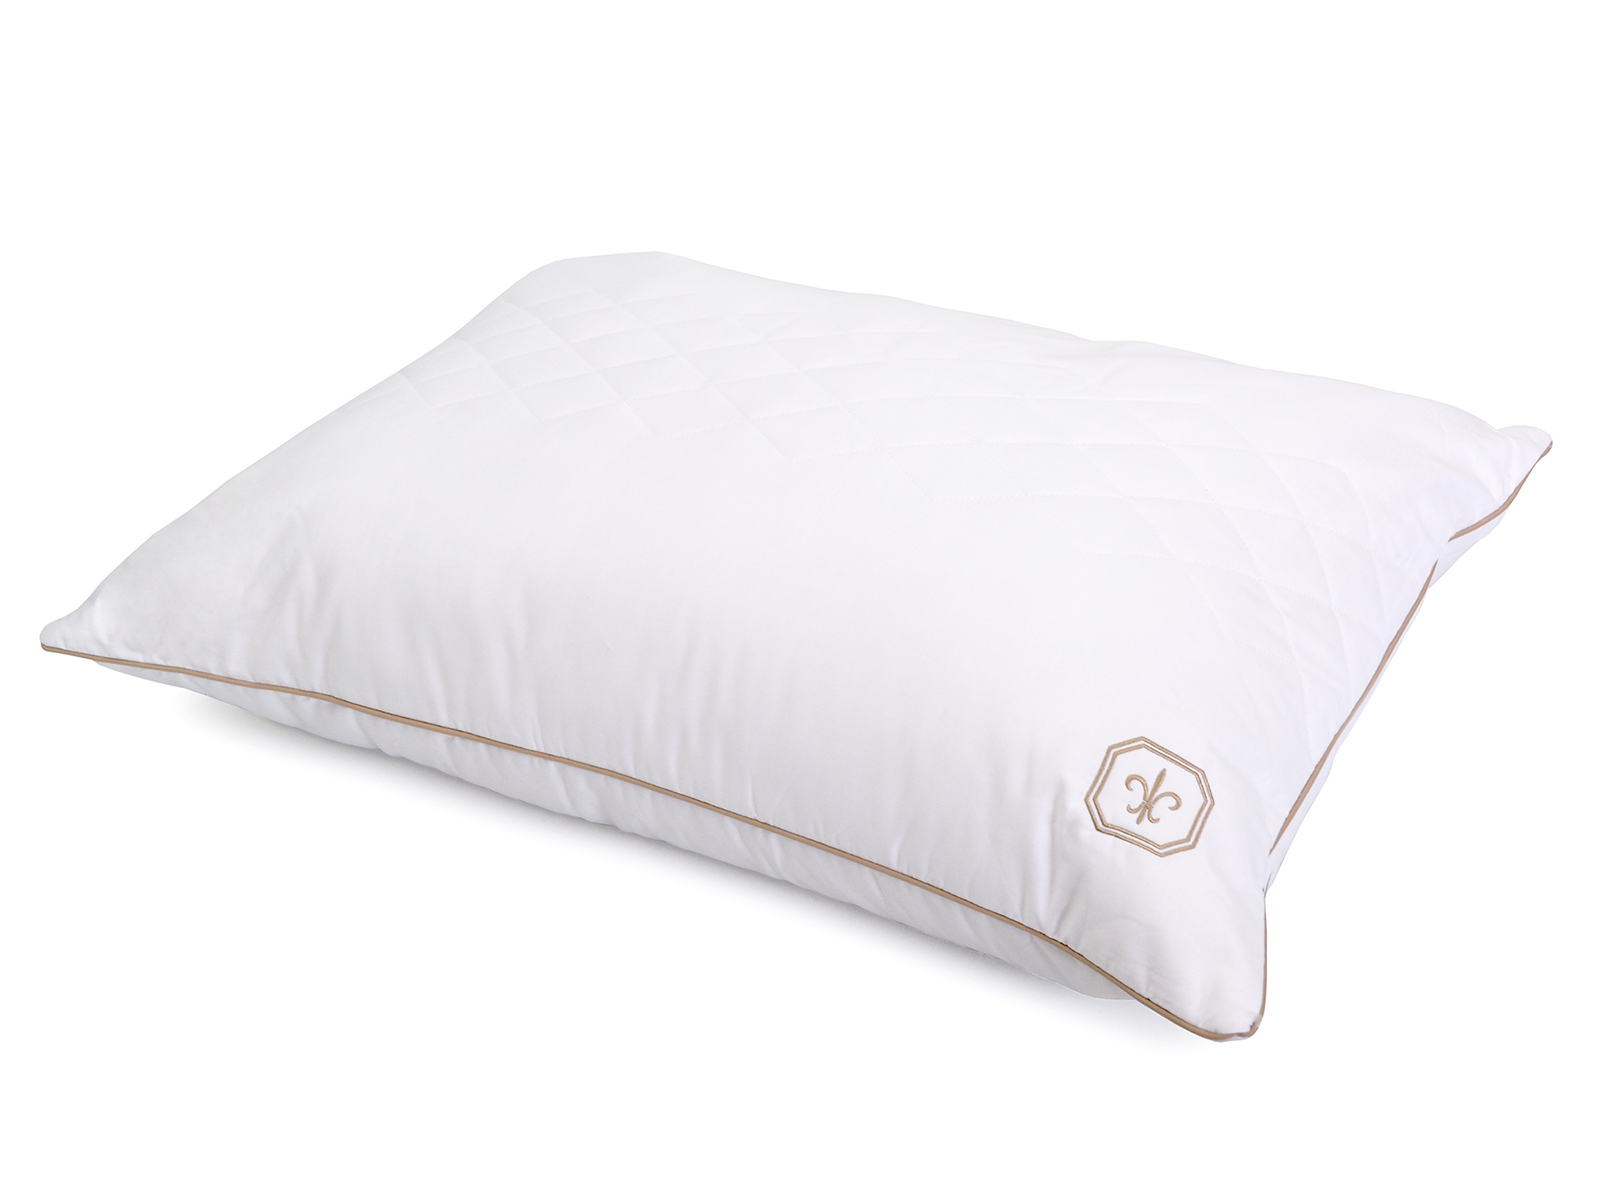 Stearns and Foster King Continuous Comfort Quilted Pillow